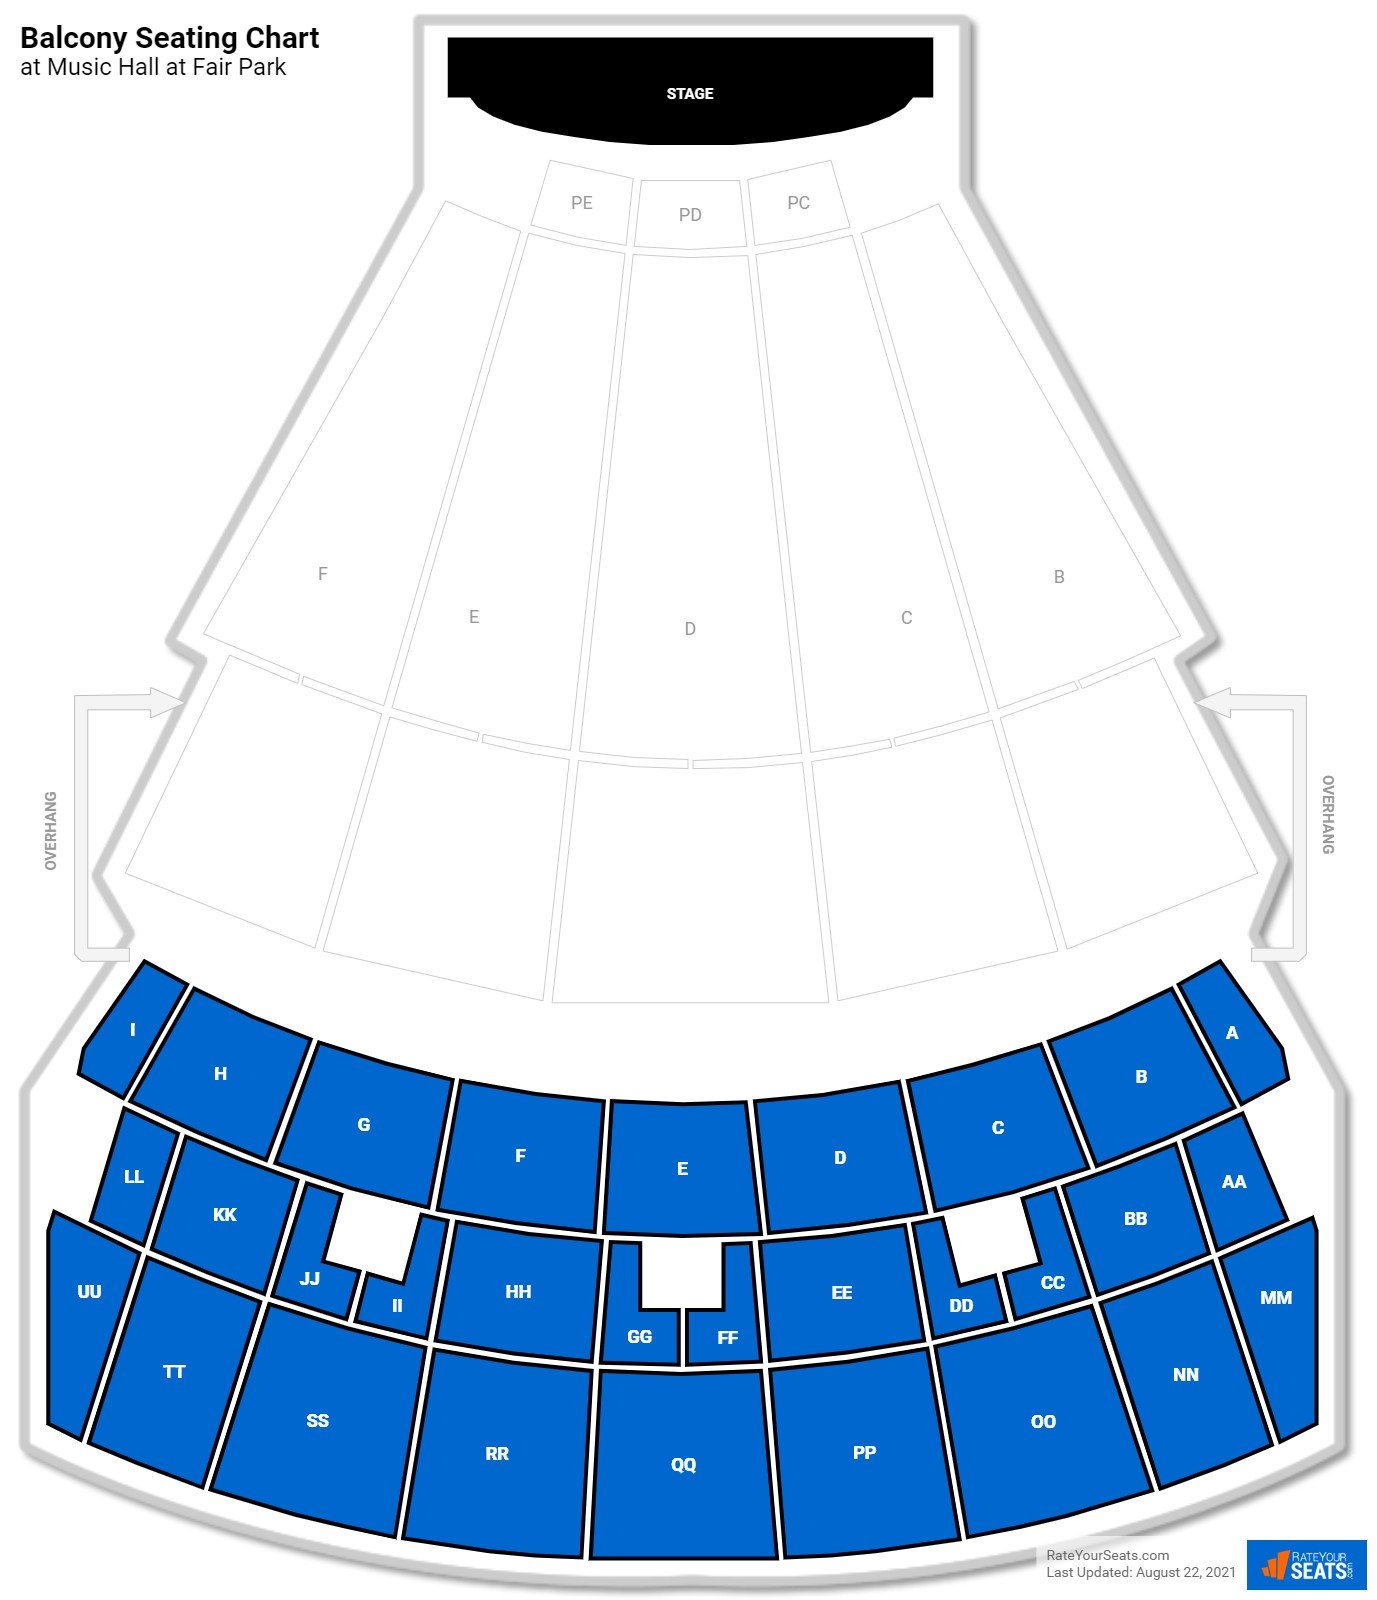 Theater Balcony Seating Chart at Music Hall at Fair Park